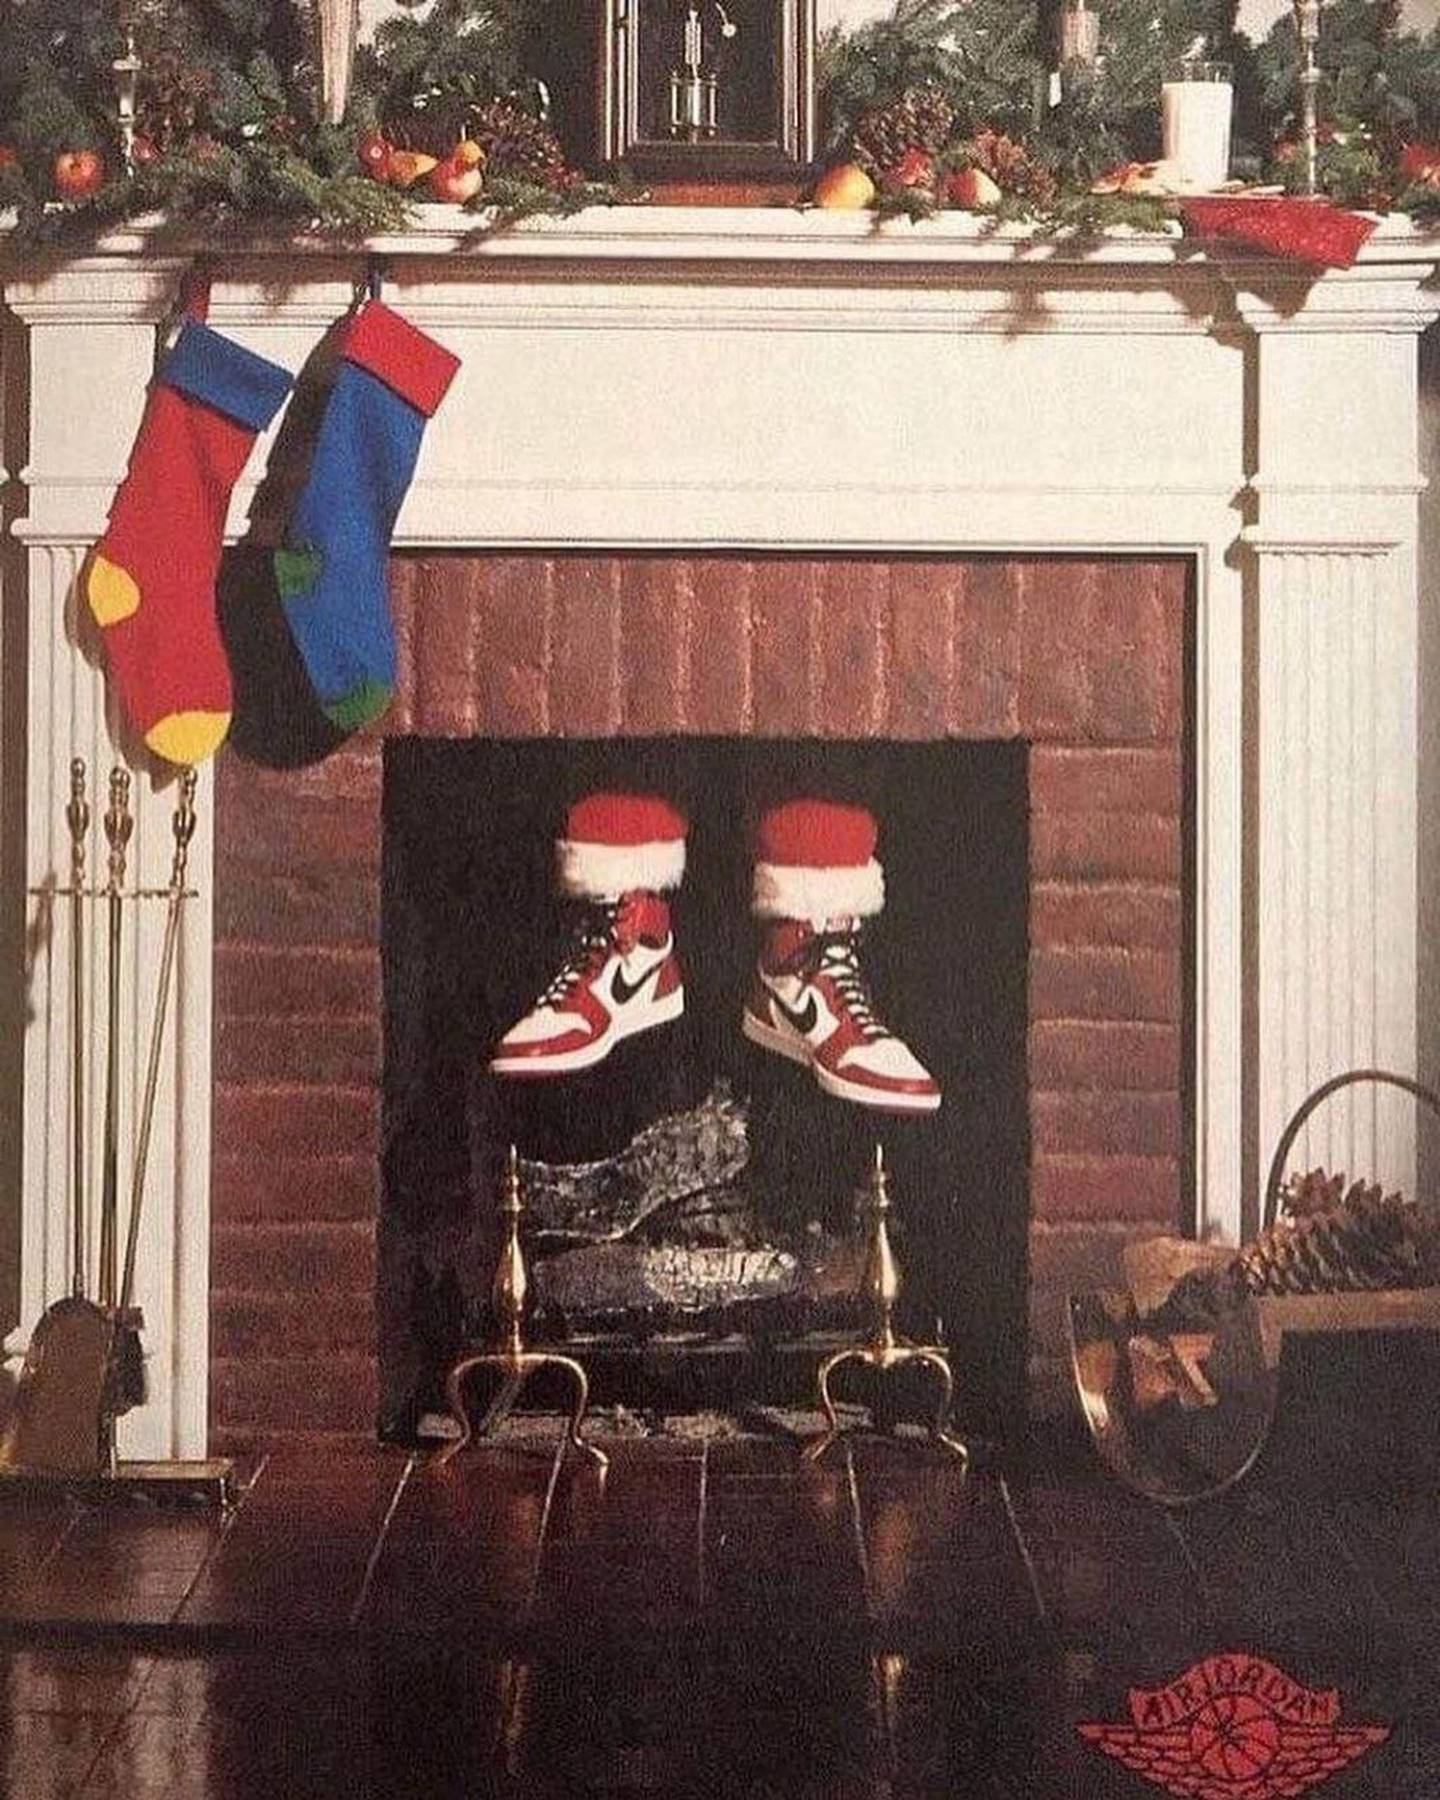 Christmas advertisement from 1985